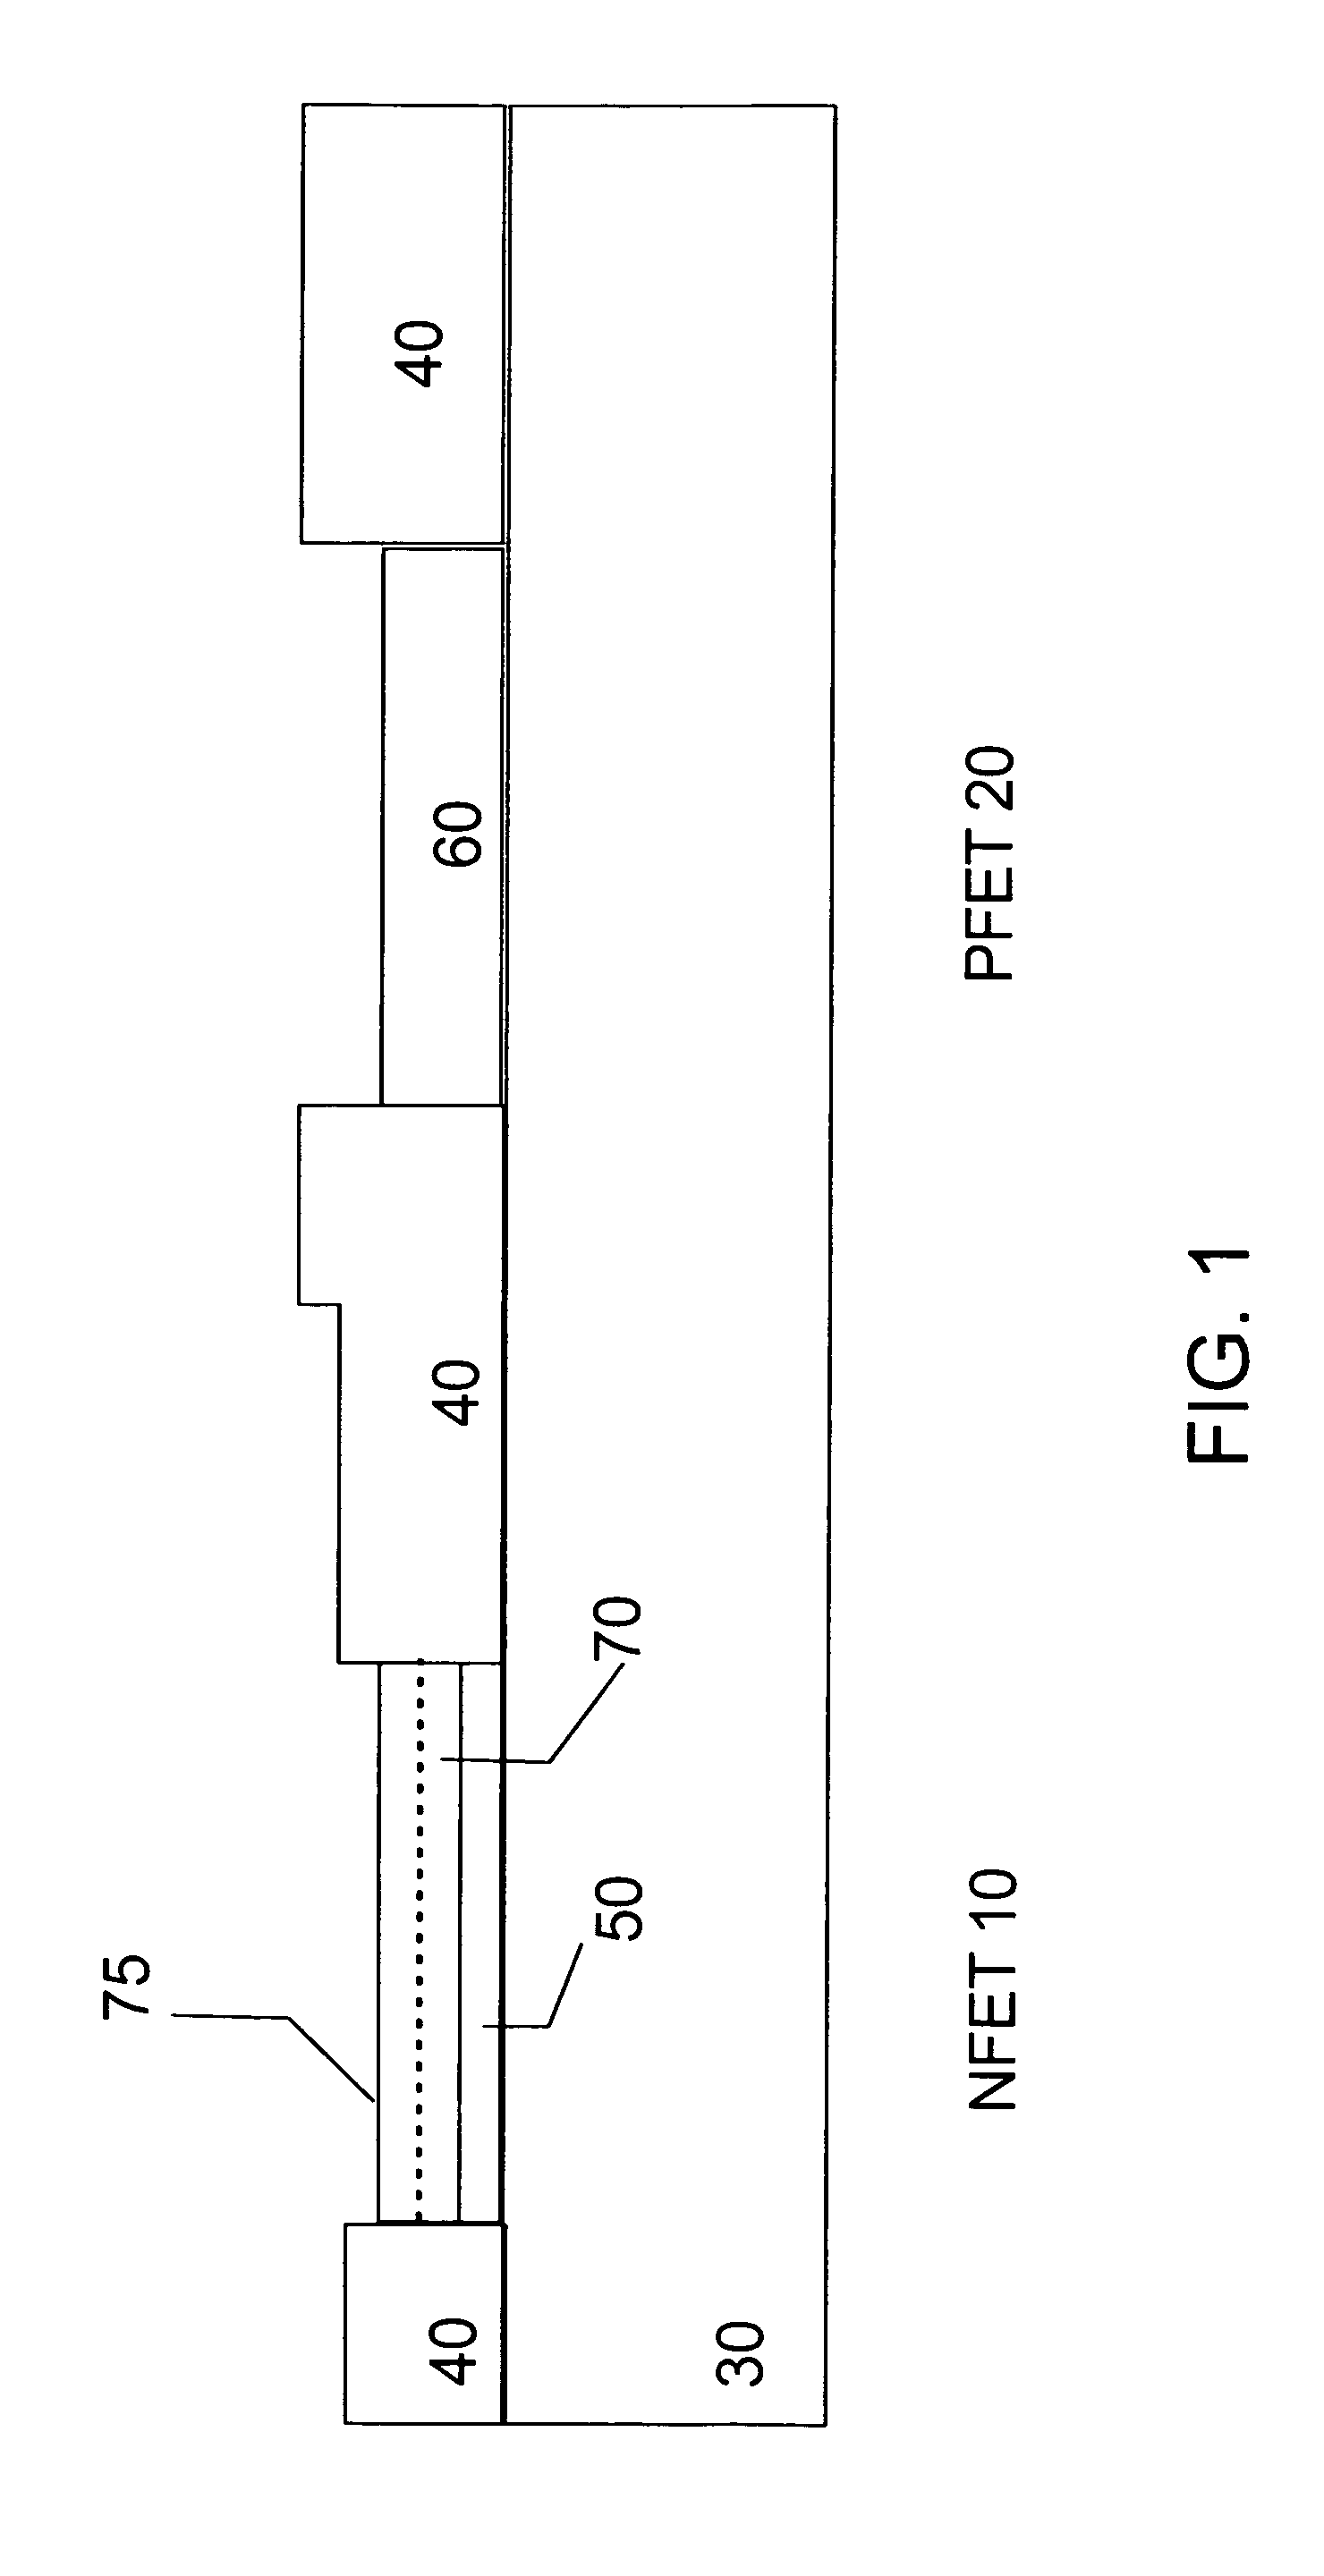 Pseudomorphic Si/SiGe/Si body device with embedded SiGe source/drain